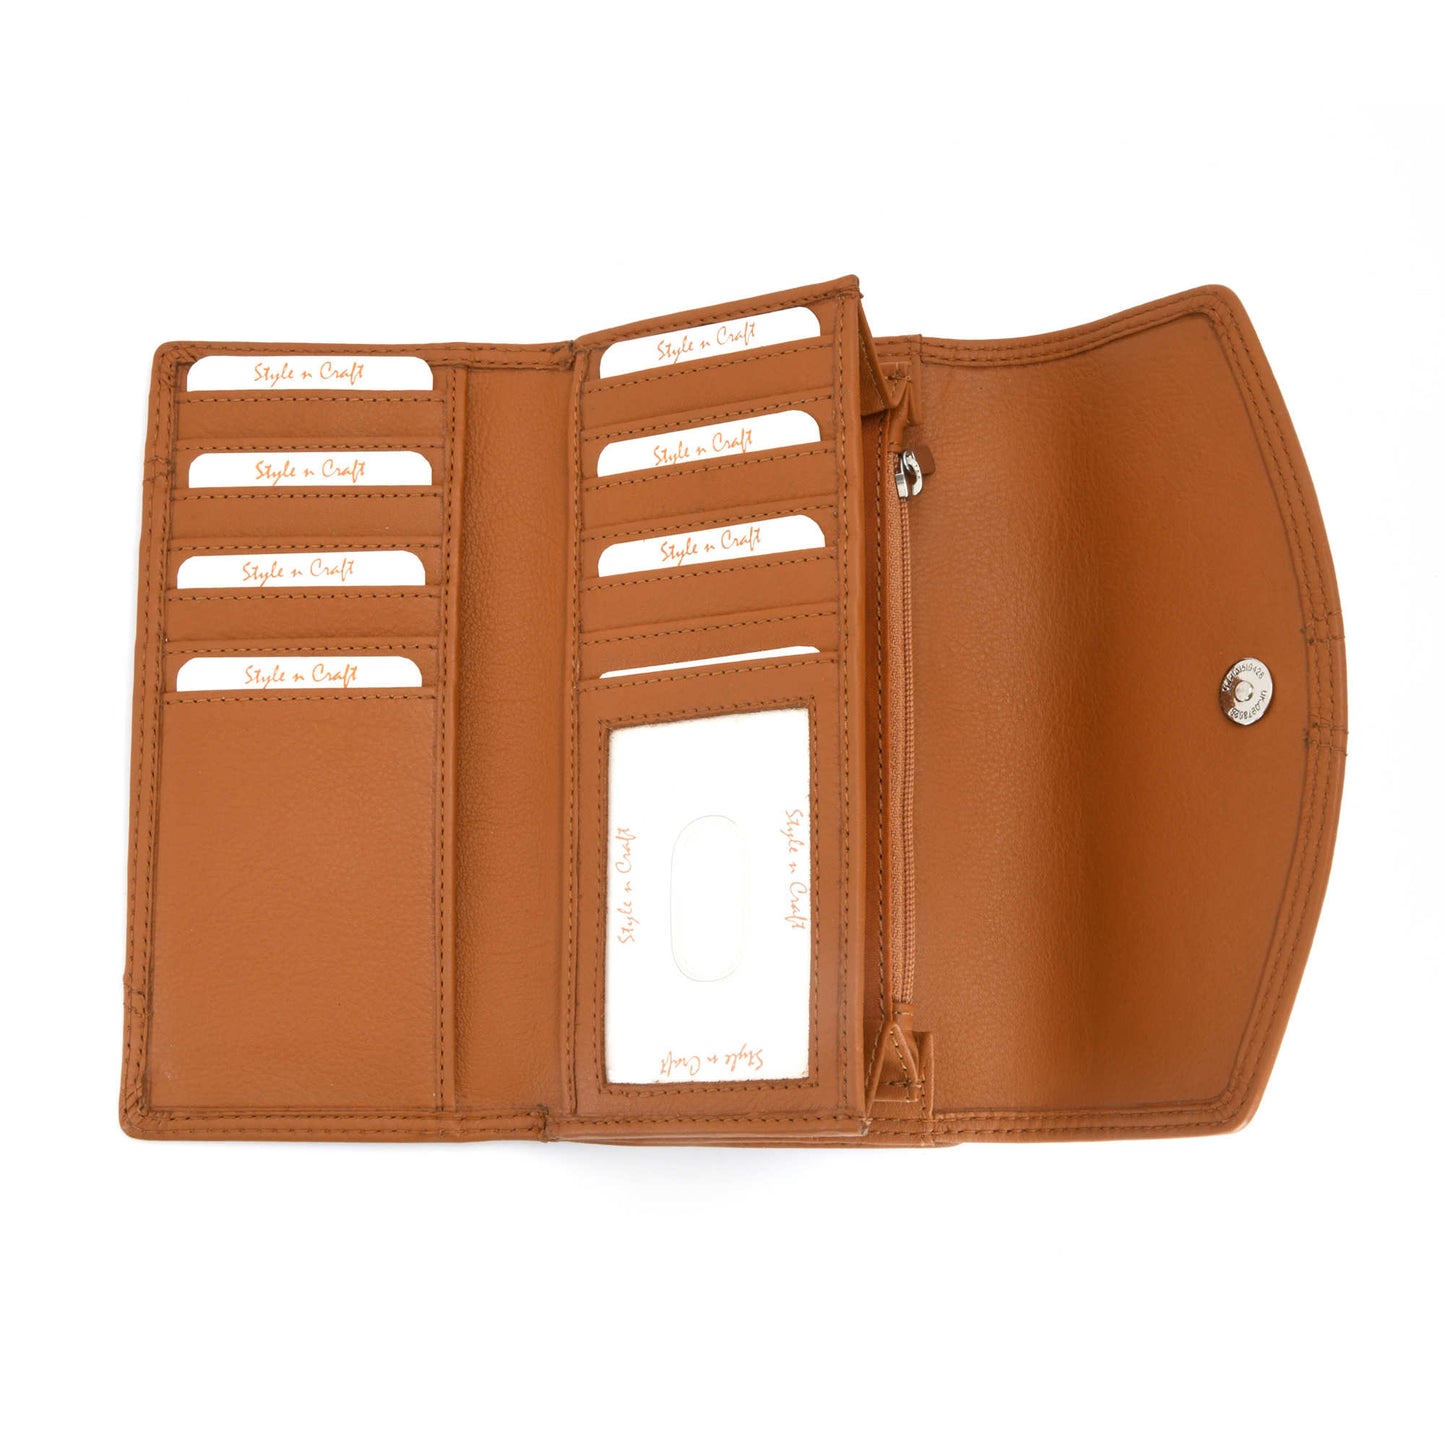 Style n Craft 300954-CG Clutch Wallet for Ladies in Cow Leather - Tan Color - Front Open Inside View